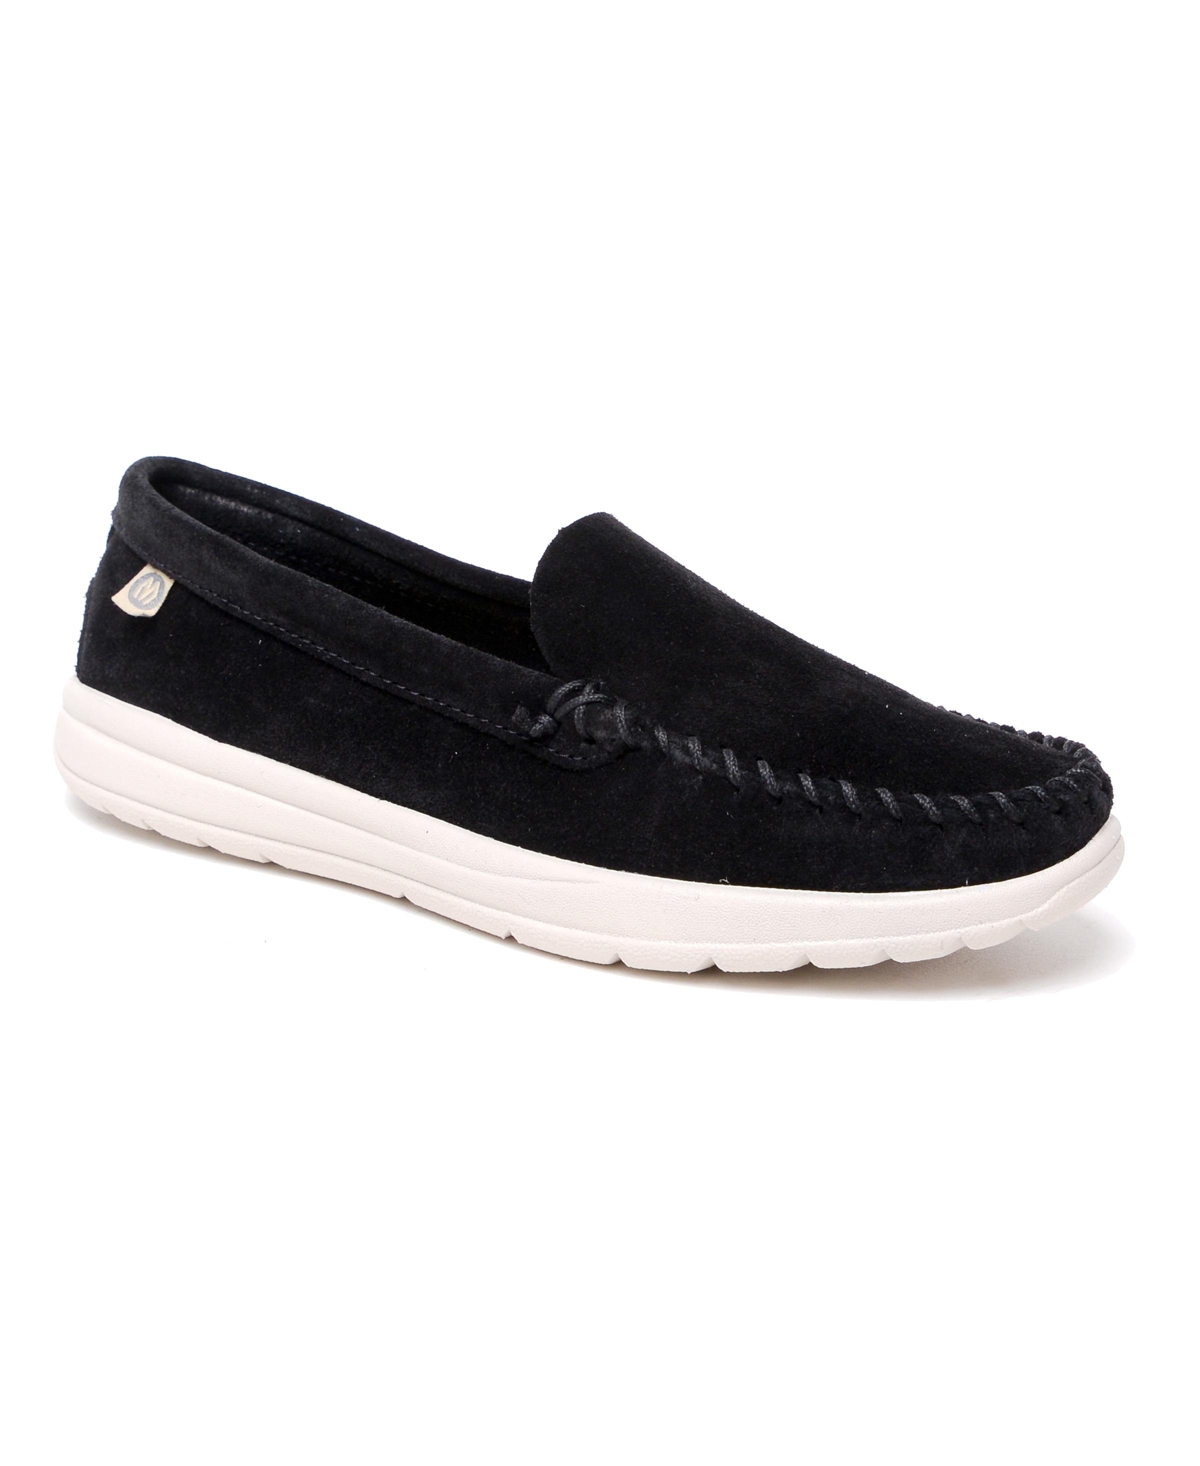 Women's Discover Classic Slip-on Moccasin Shoes - Black